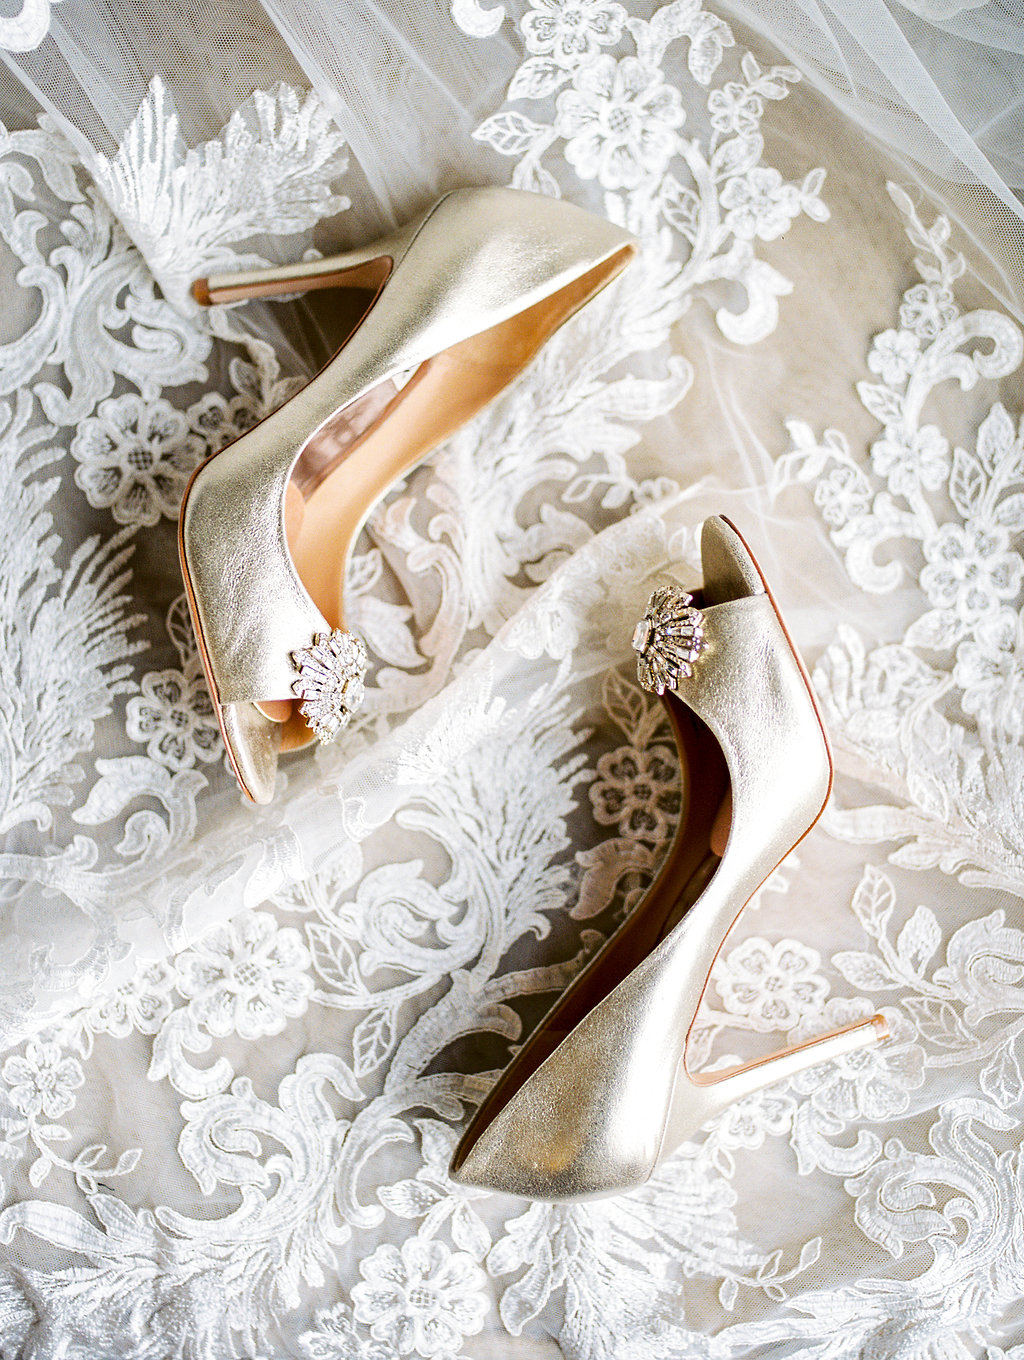 Copper and White DC Wedding at DAR. DC Wedding Planner Bright Occasions. Photo by Lissa Ryan Photography